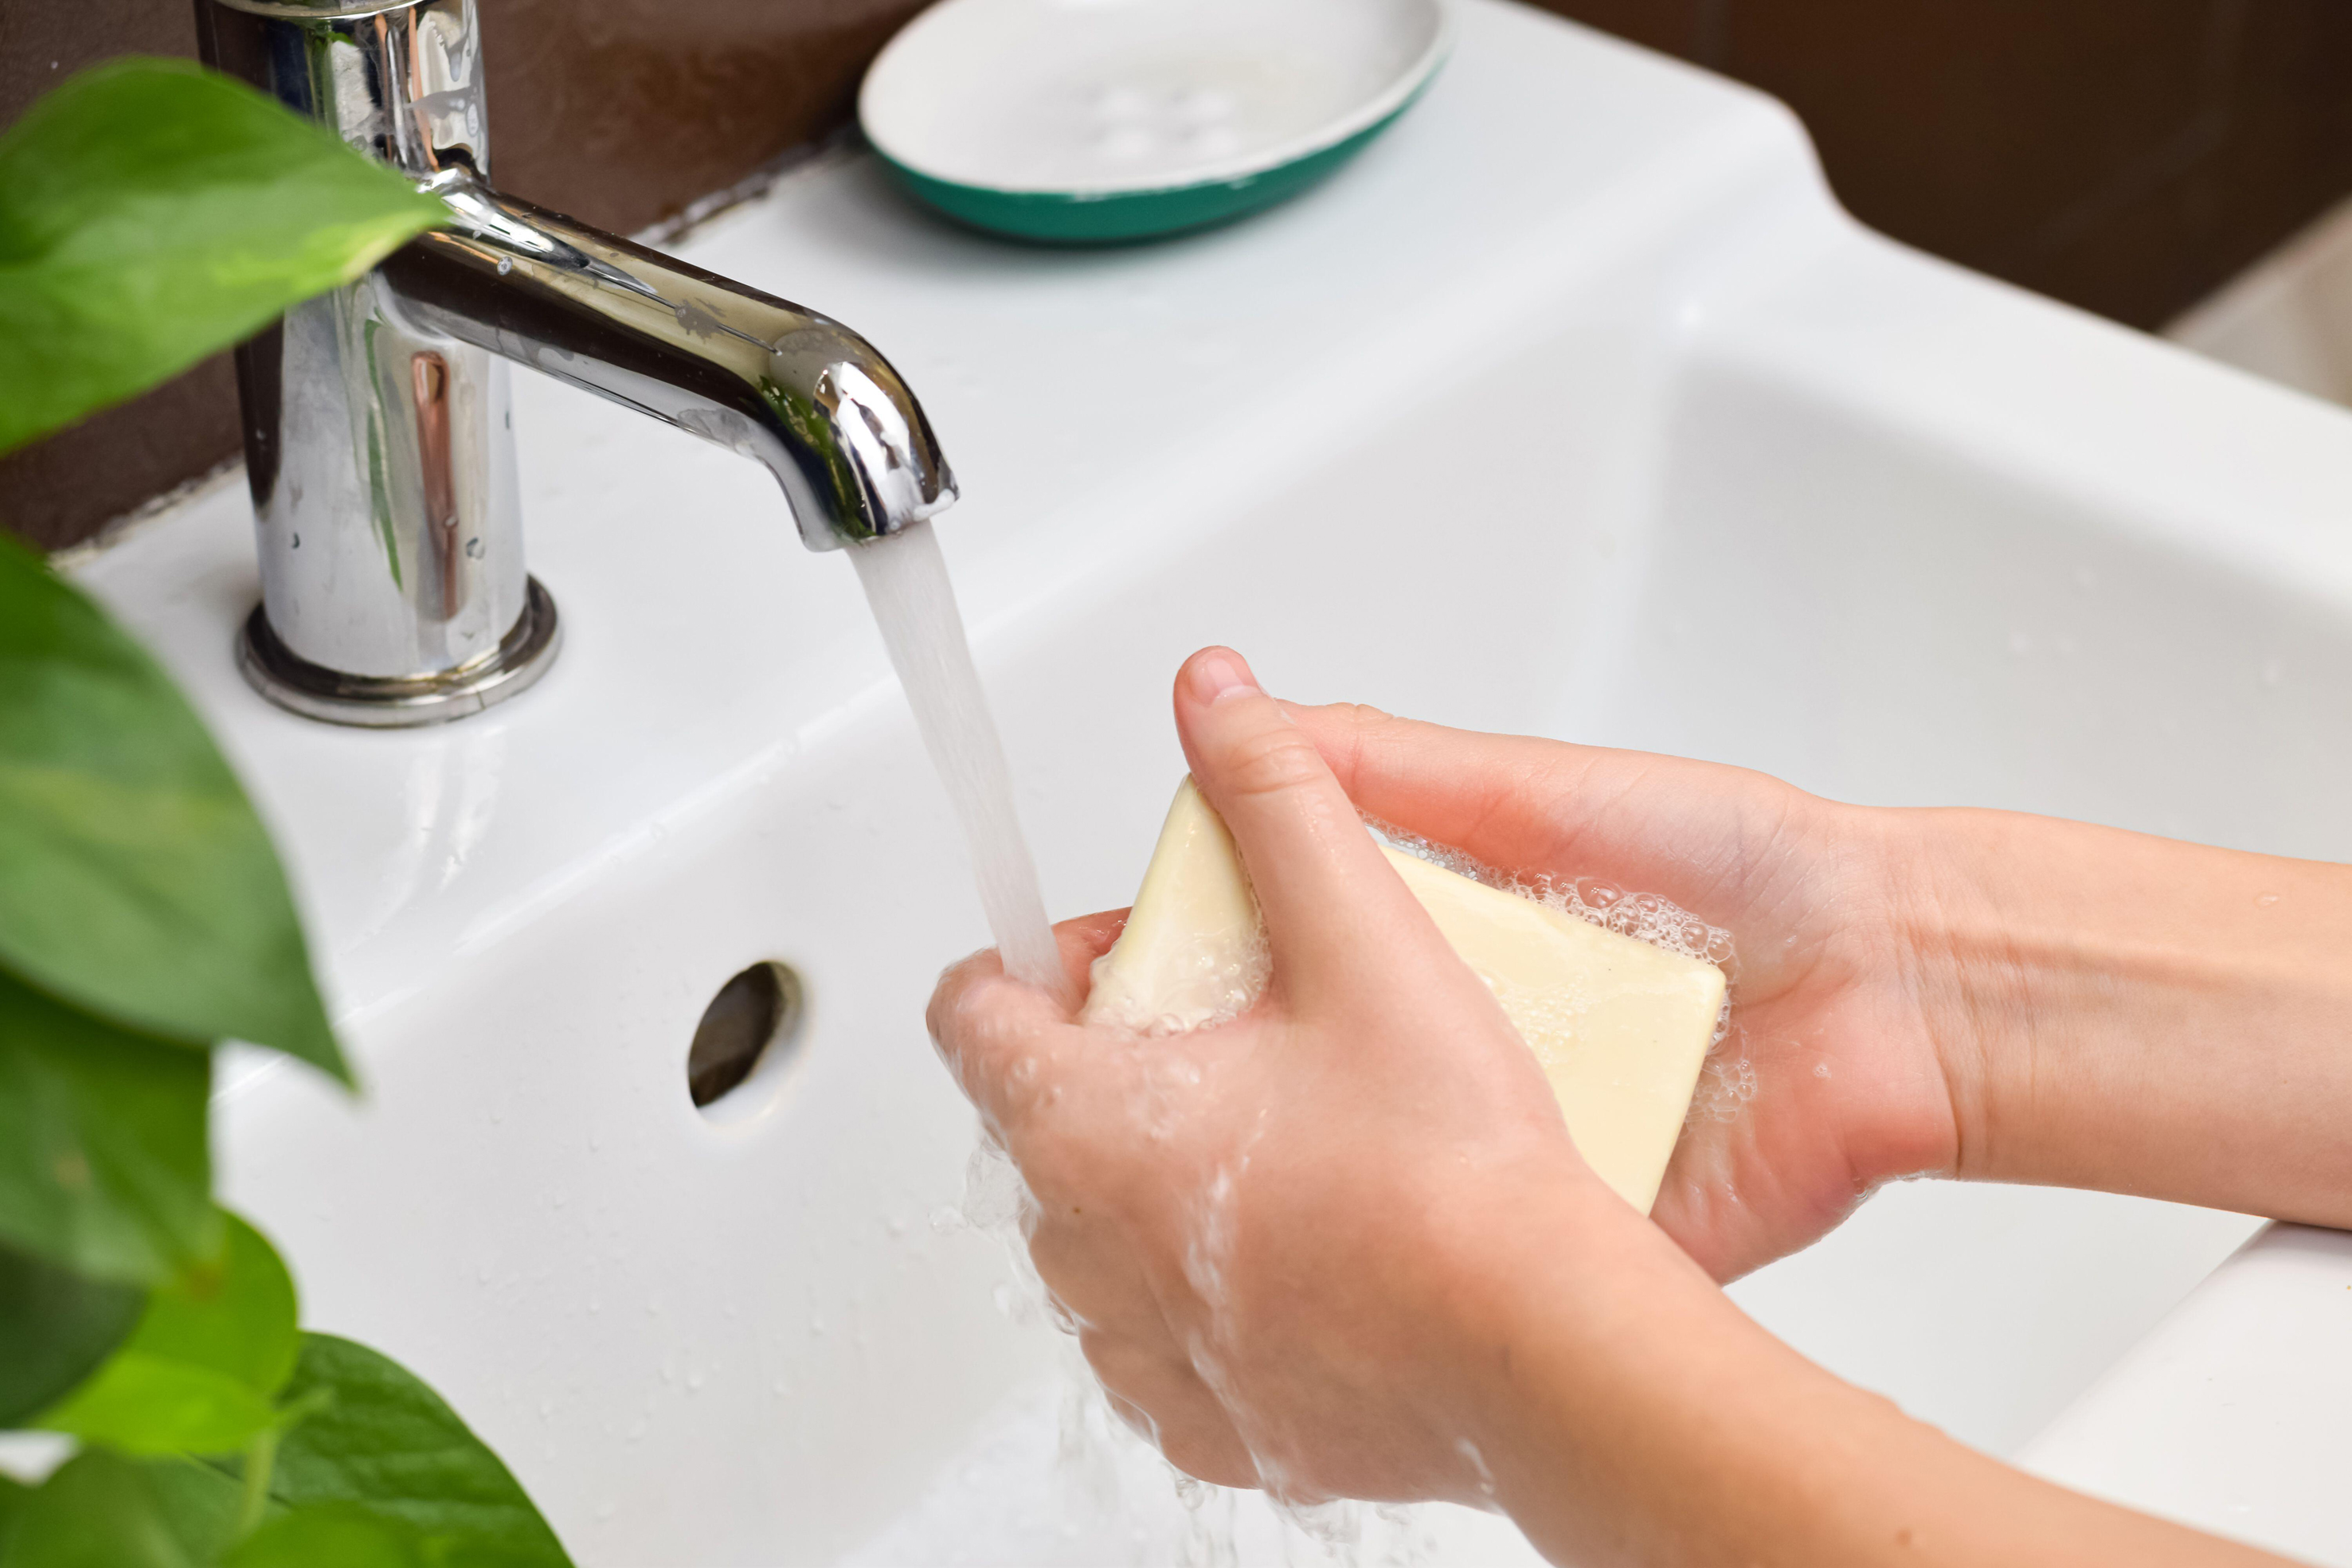 Child washing their hands against viruses and infections